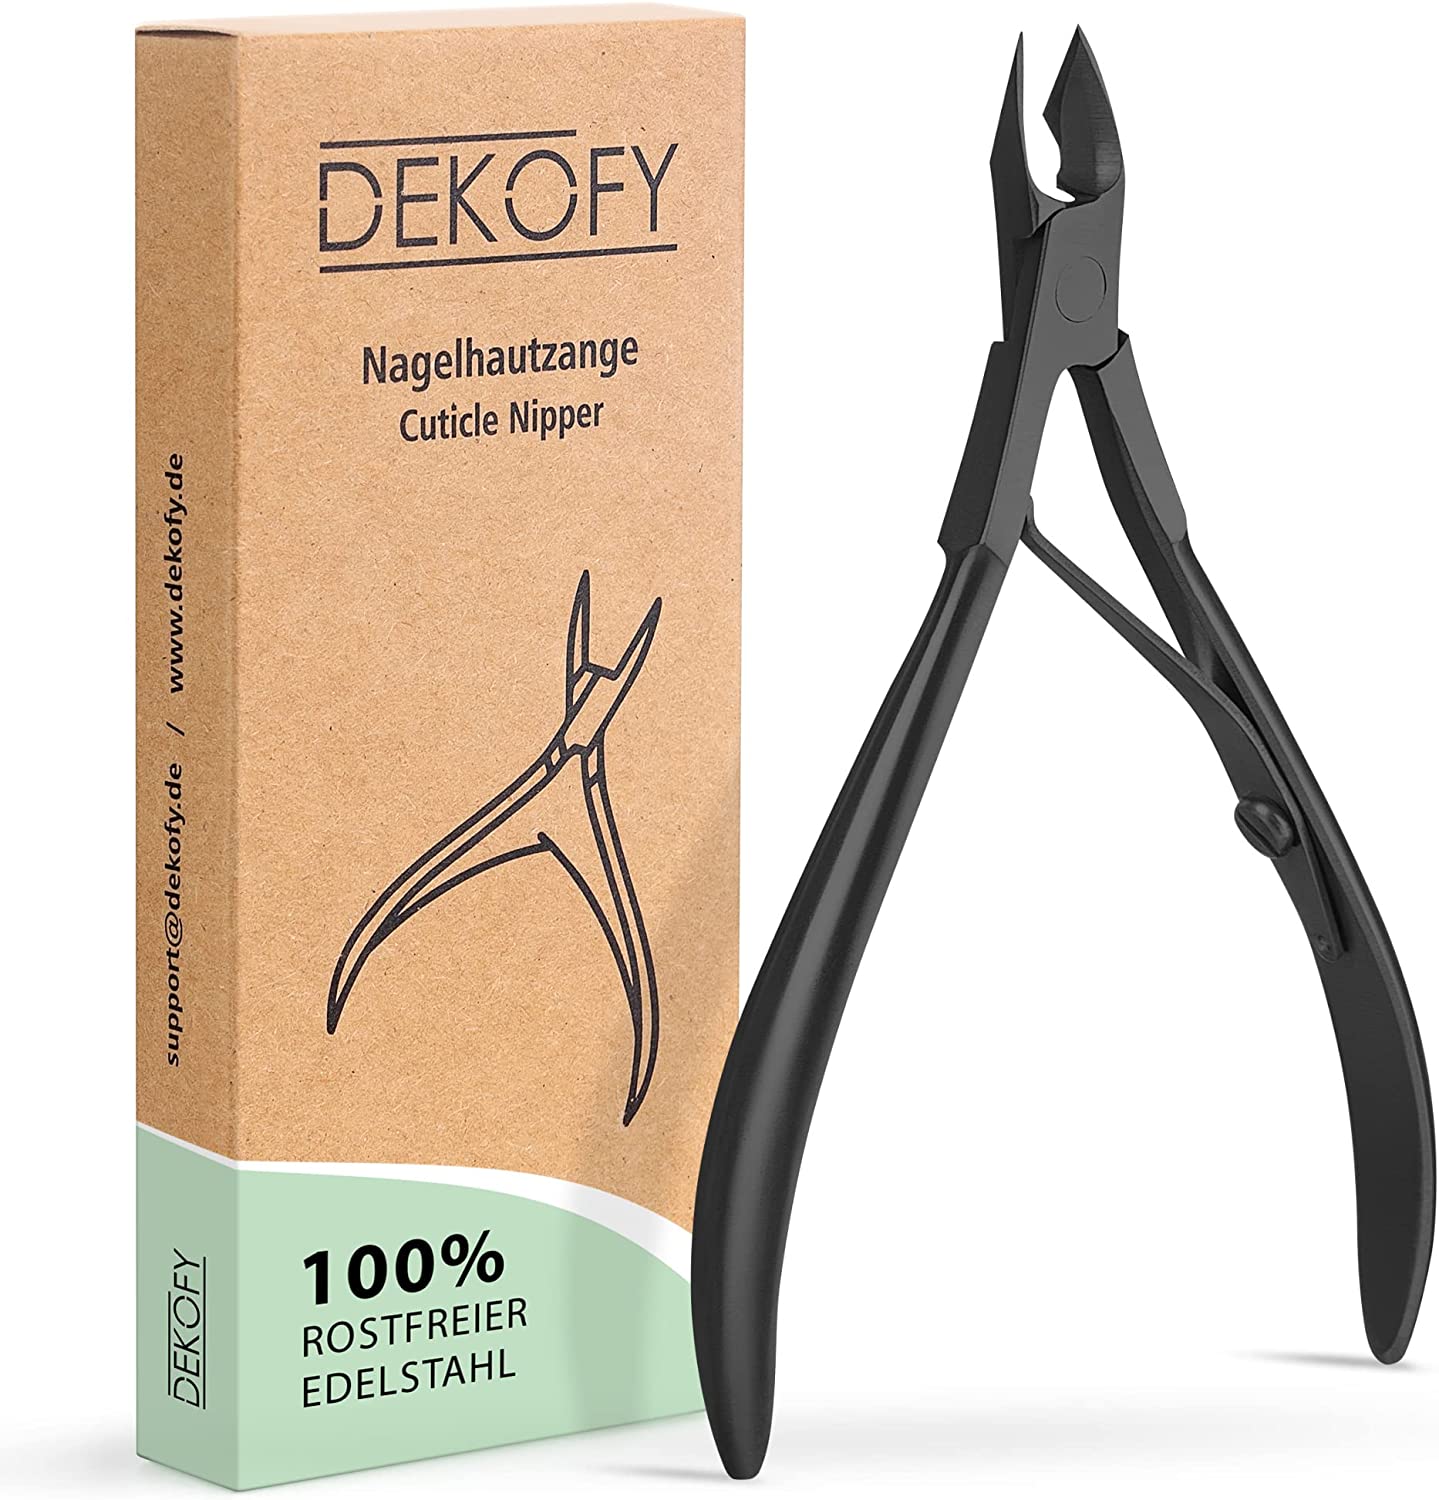 DEKOFY Cuticle Nippers Black - Extra Sharp Cuticle Cutter with Precise Cut - for Painless Cuticle Removal on Fingers and Toes - Cuticle Scissors, Cuticle Remover, ‎black